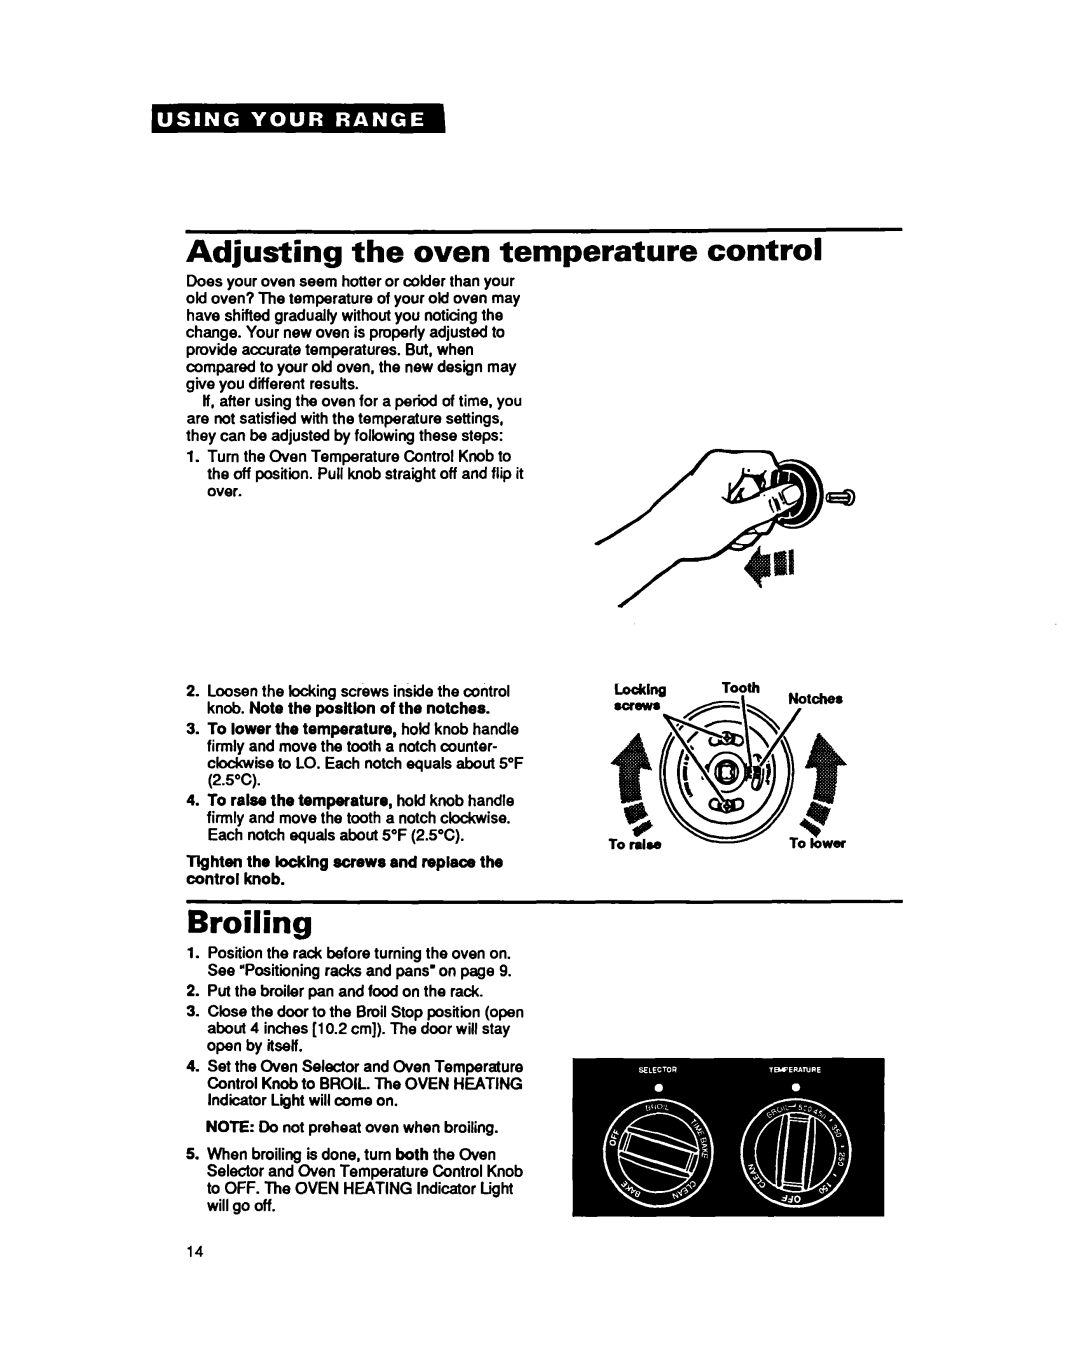 Whirlpool RF377PXY important safety instructions Adjusting the oven temperature control, Broiling 